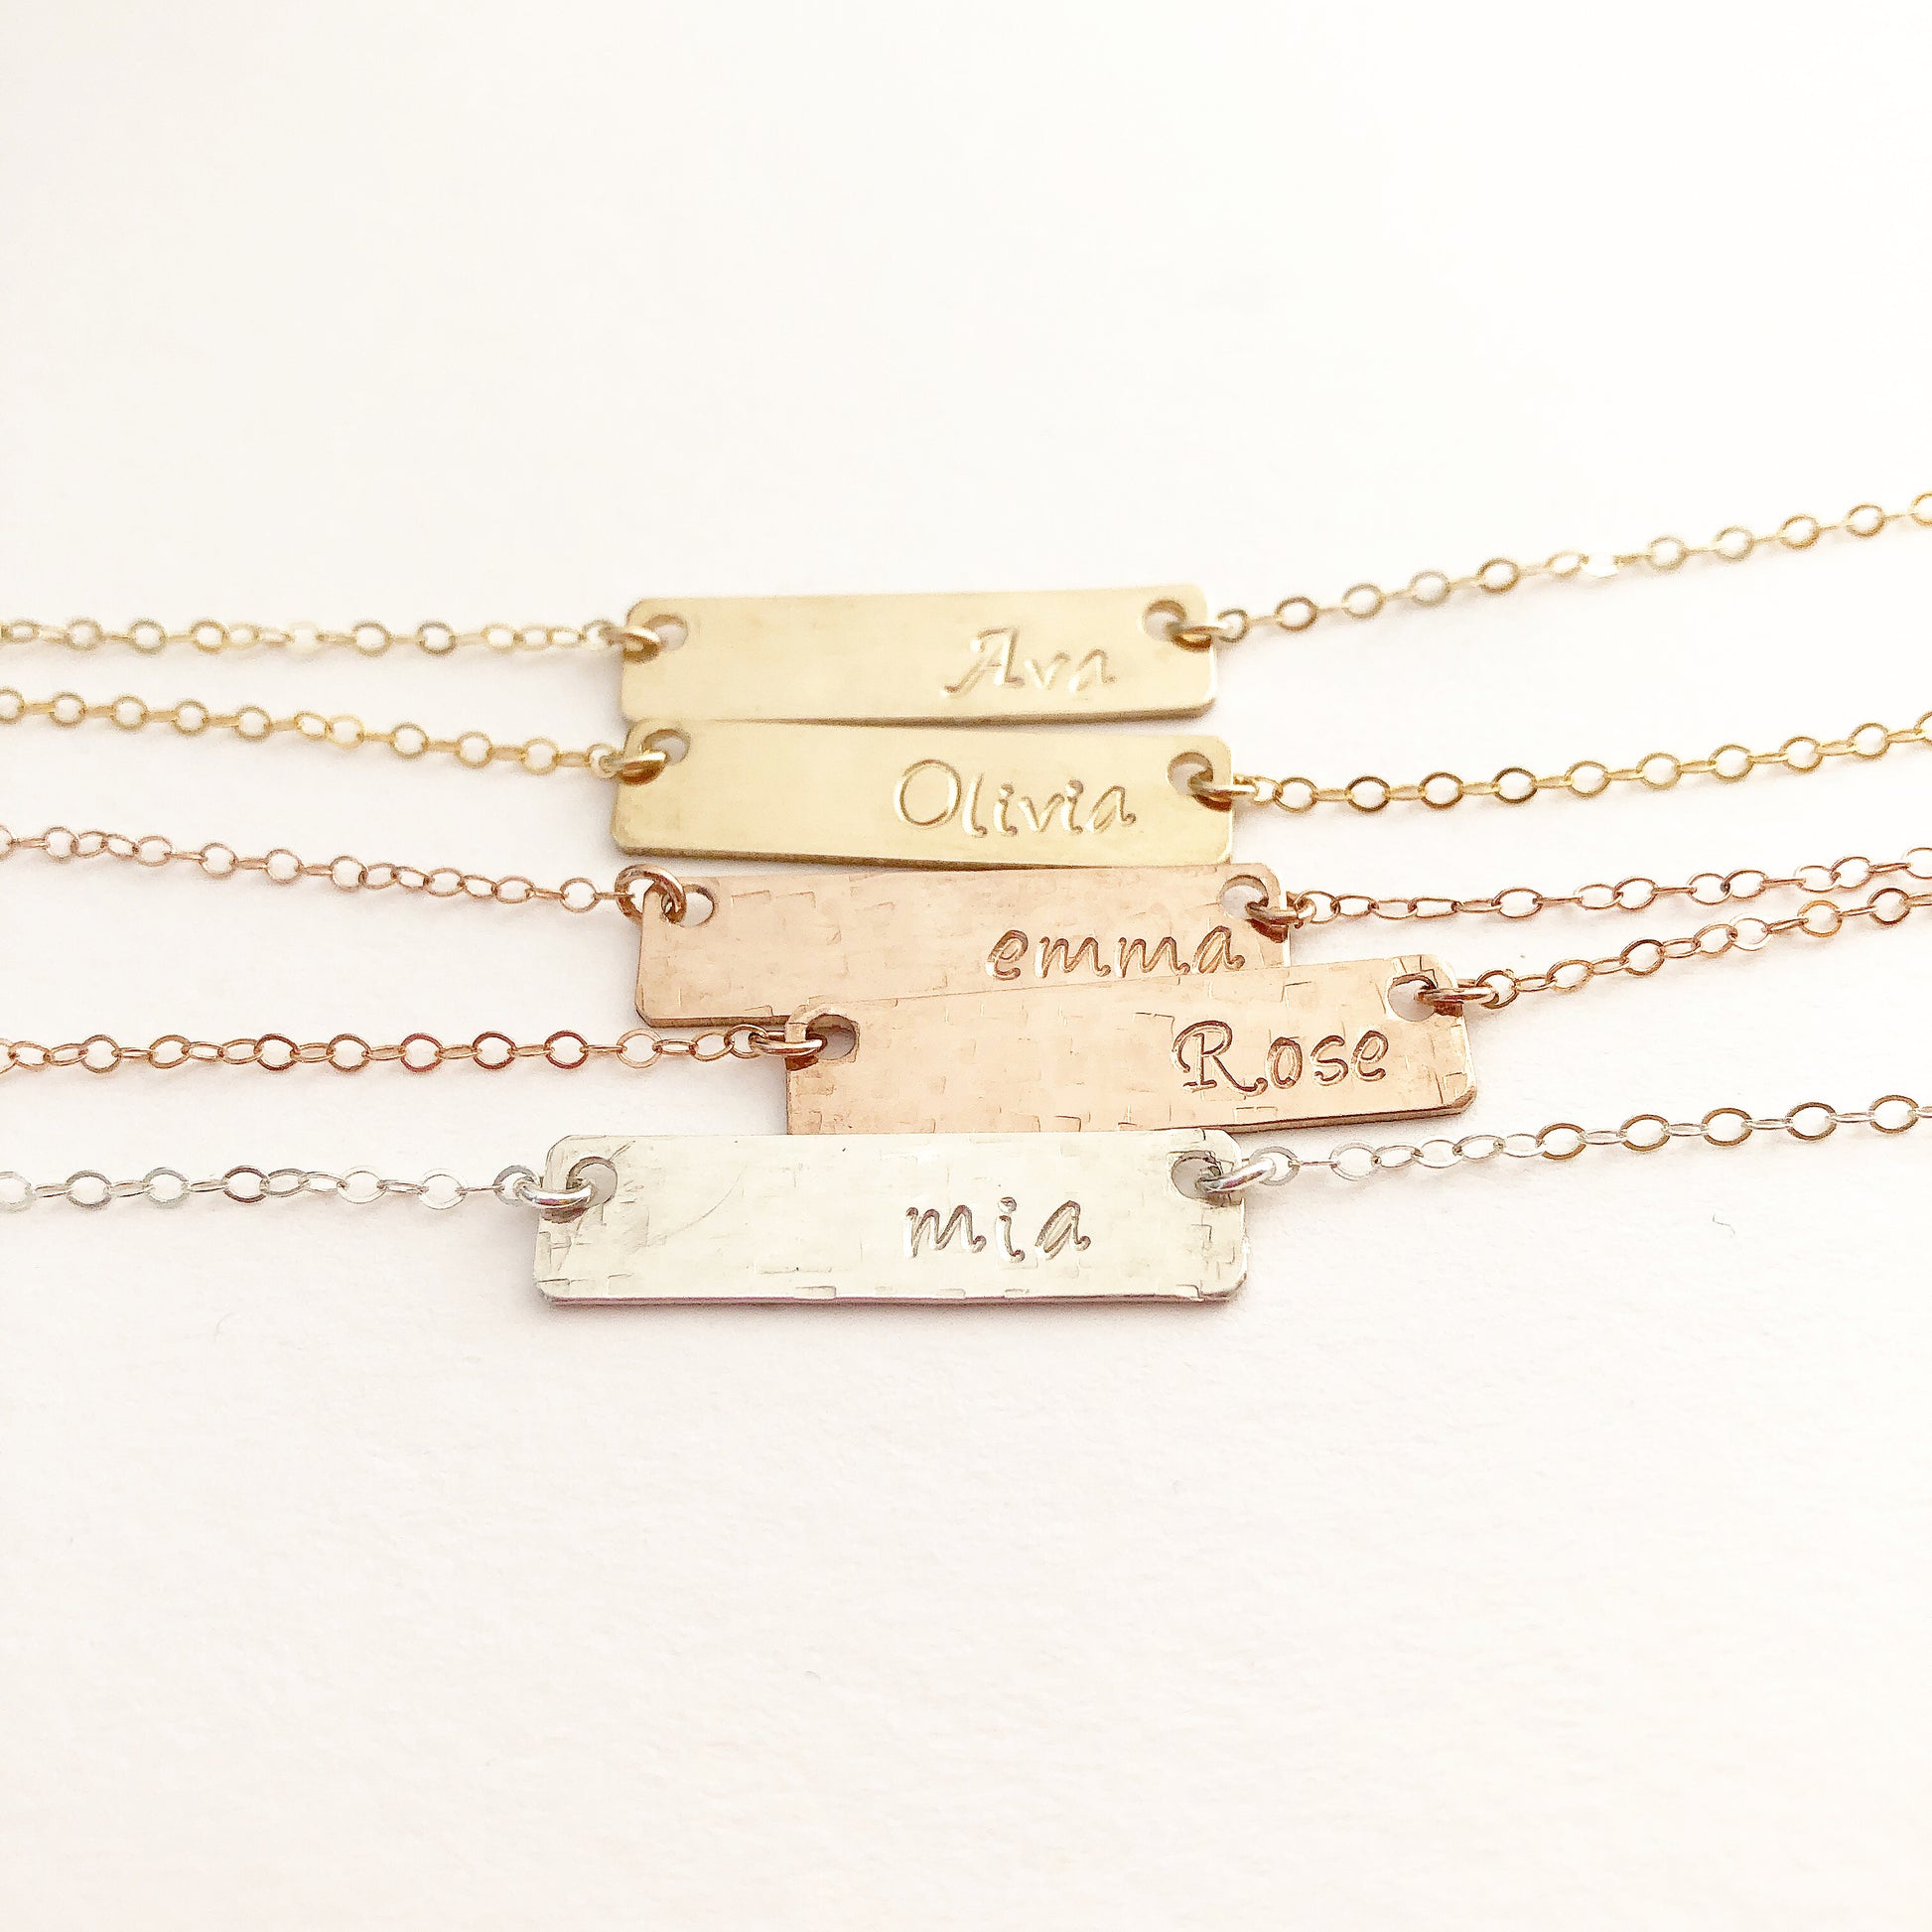 Name Bar Necklace, Personalized Bar Necklace, Bar Necklace, Custom Necklace, Personalized Gift, Graduation Gift, Holiday, Mother’s Day Gifts